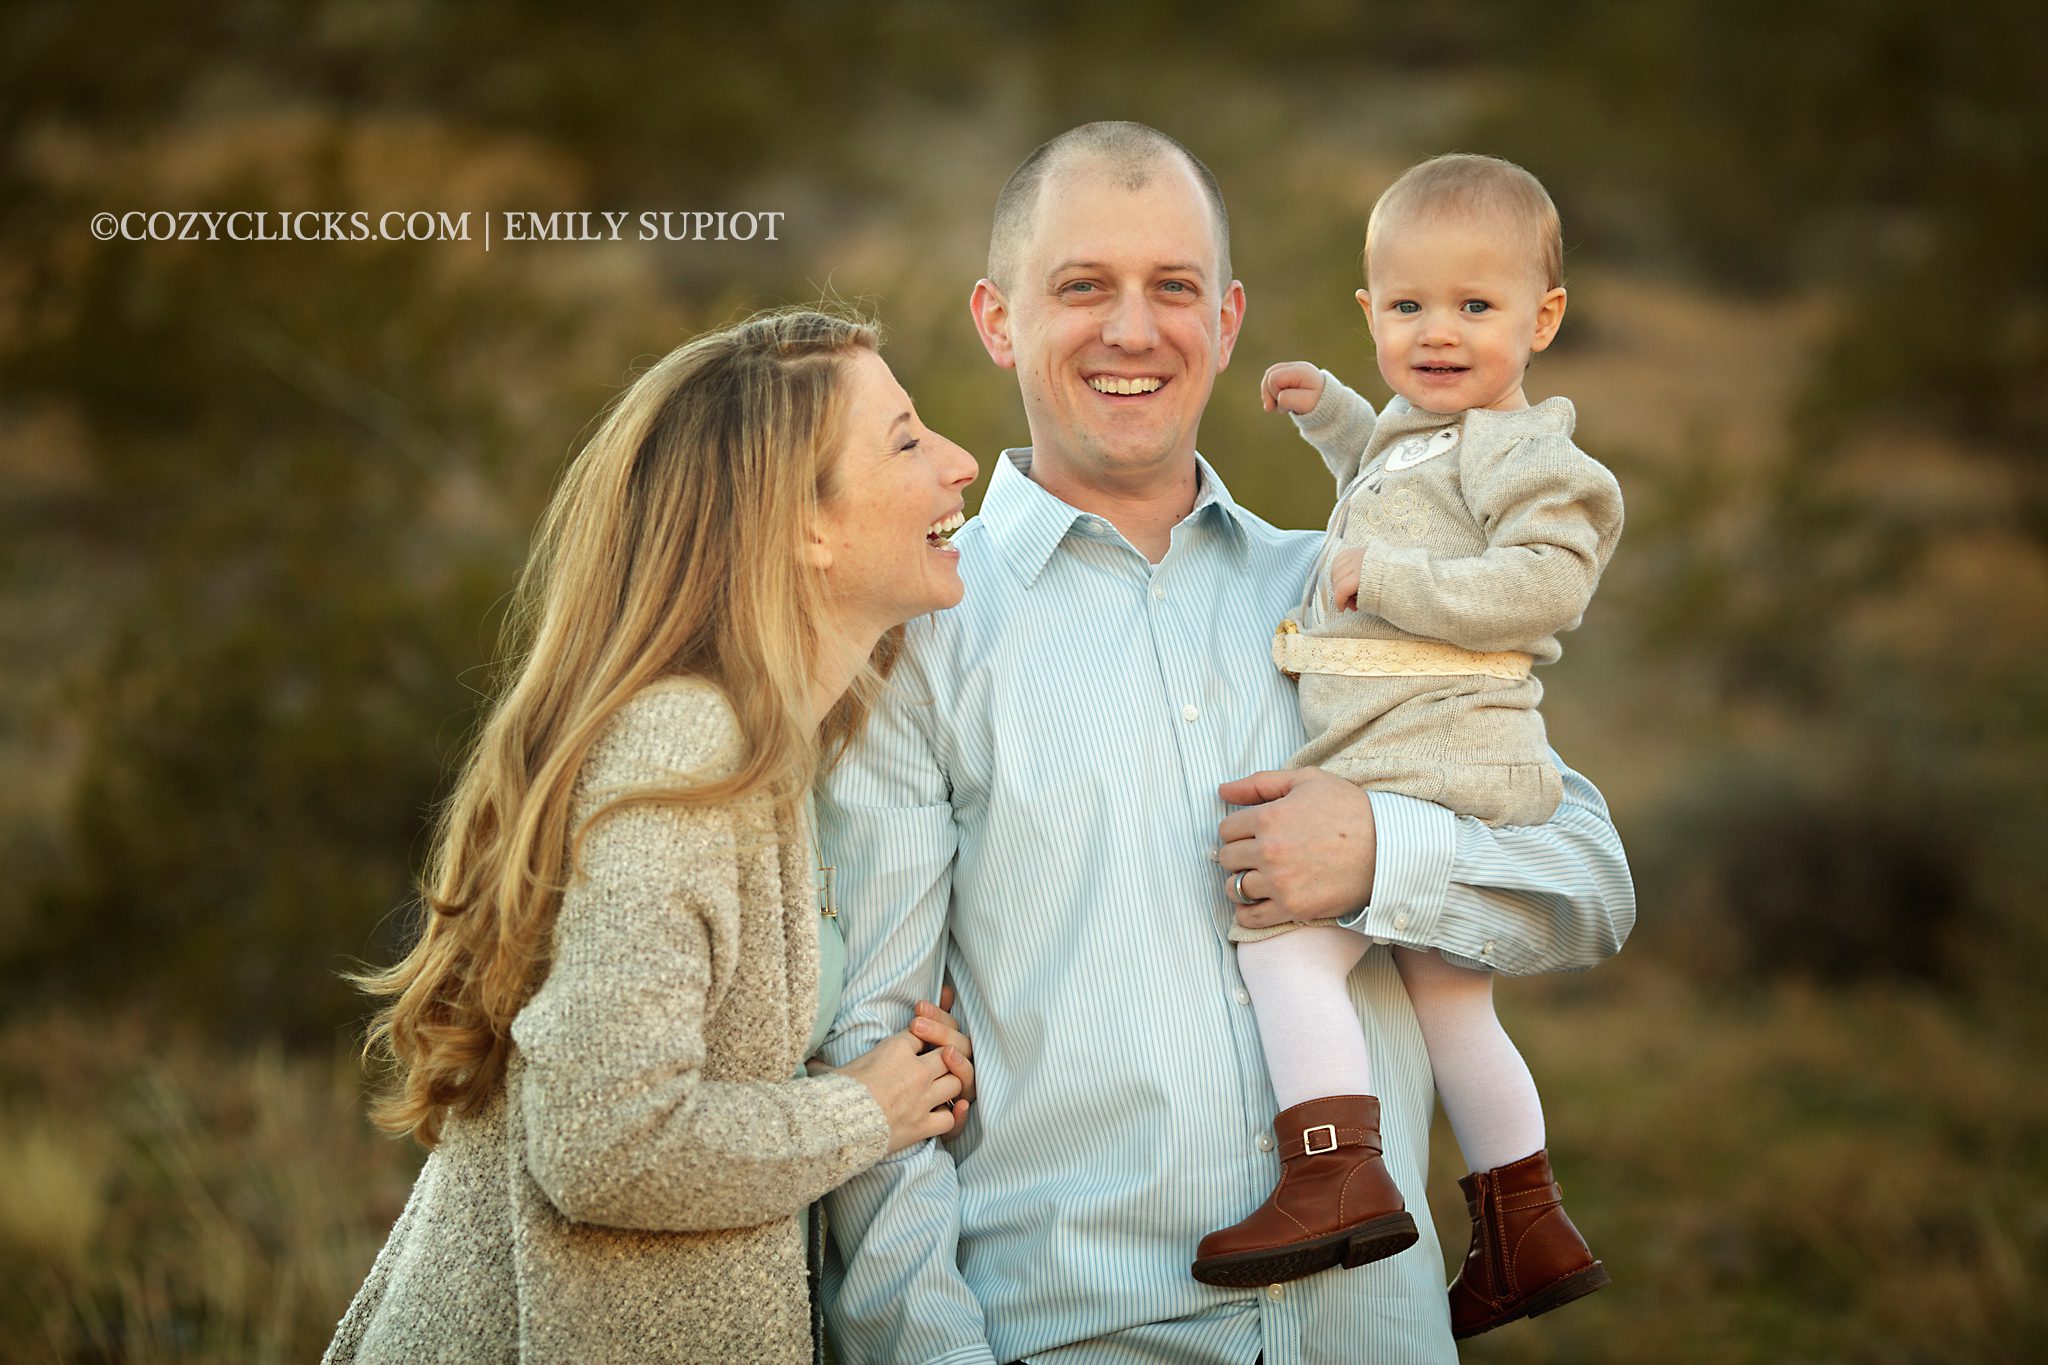 Family and child photographer in Ahwatukee, Phoenix, Scottsdale and surrounding areas